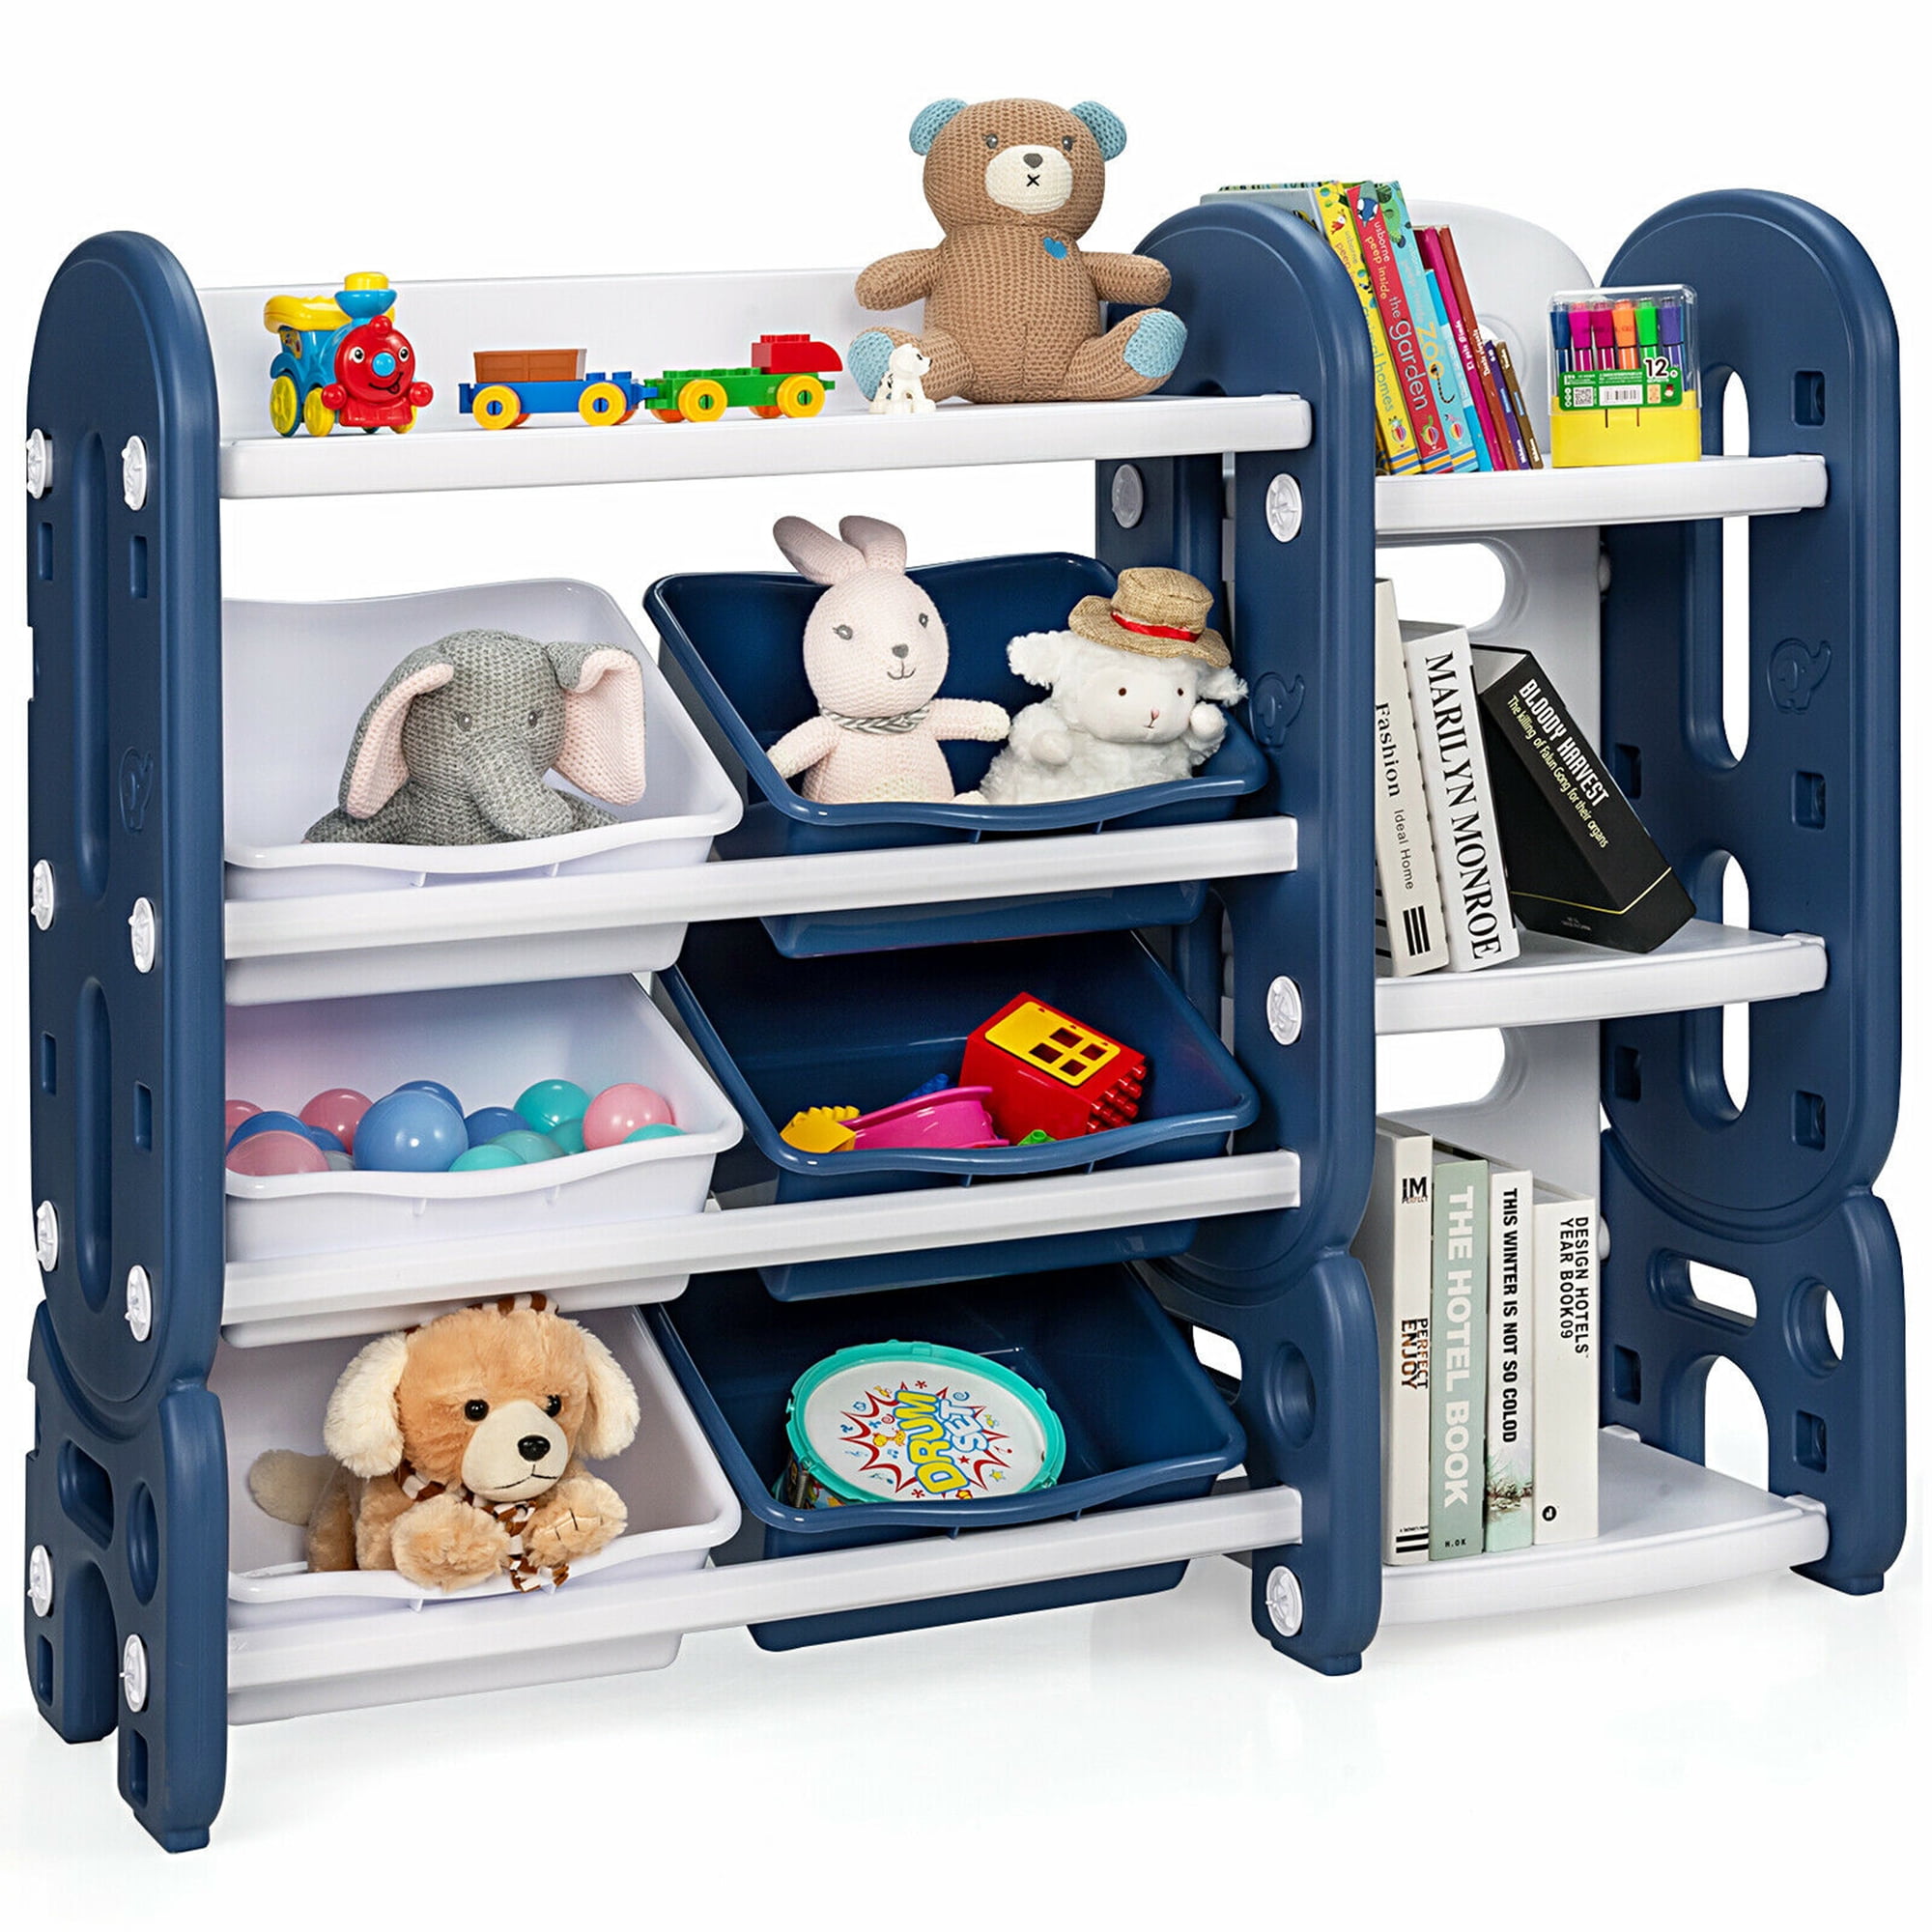 Reading Nook and Bedroom Toy Chest with Movable Drawers and Open Storage Cube Shelf MUPATER Kids Toy Box Organizer Storage Cabinet Nursery Toy Bins with Wheels for Playroom Grey